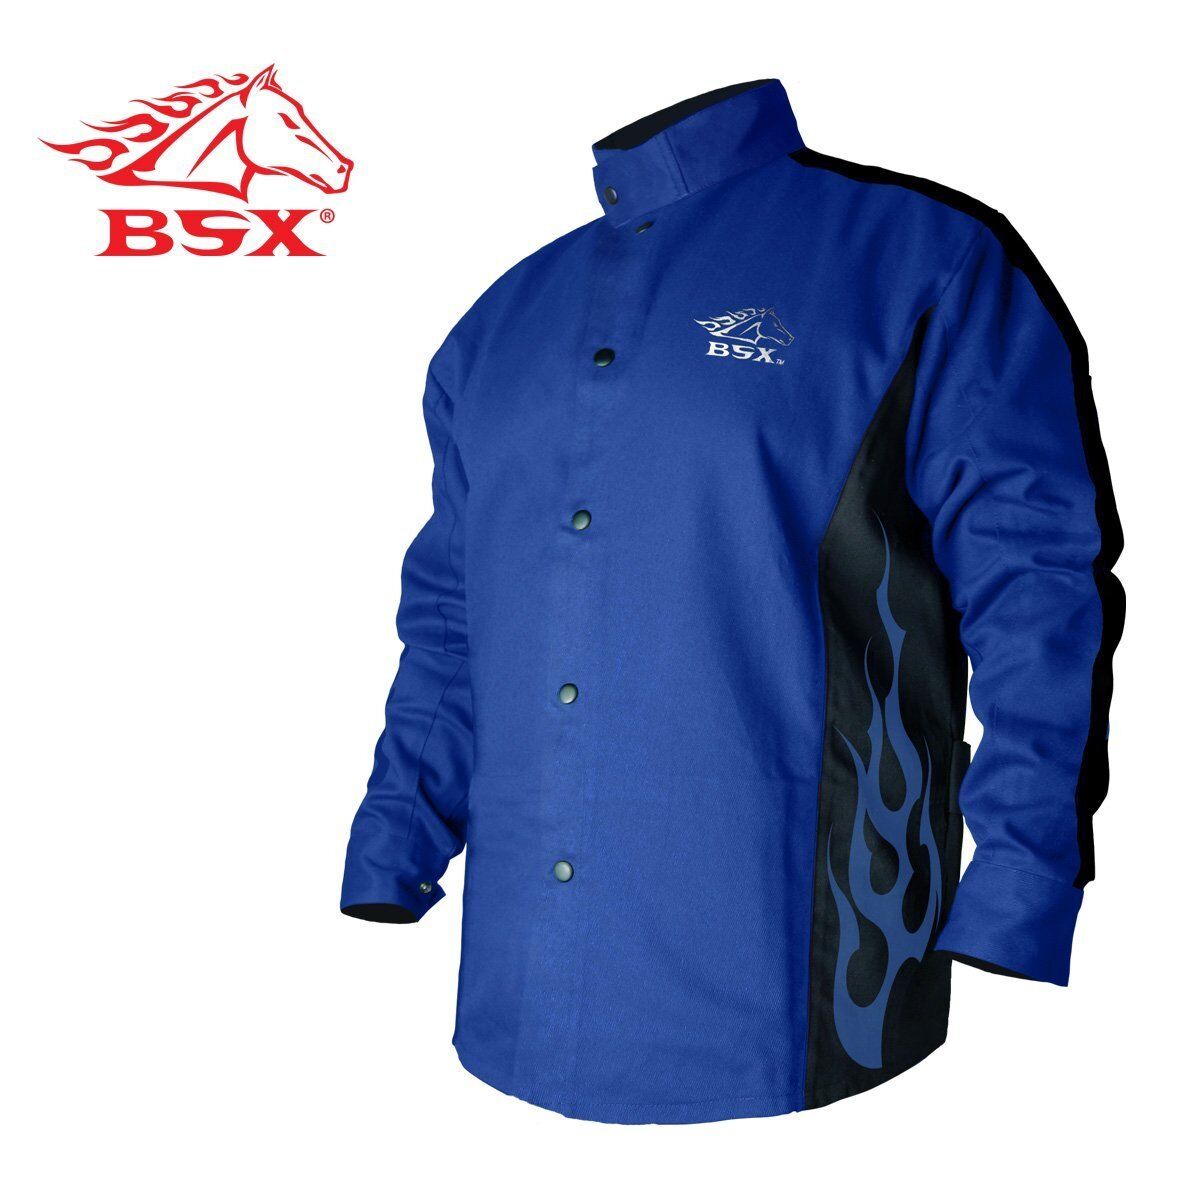 Revco BSX BXRB9C Blue FR Welding Jacket Blue Flames Large XL 2XL 3XL Med Small Revco BXRB9C